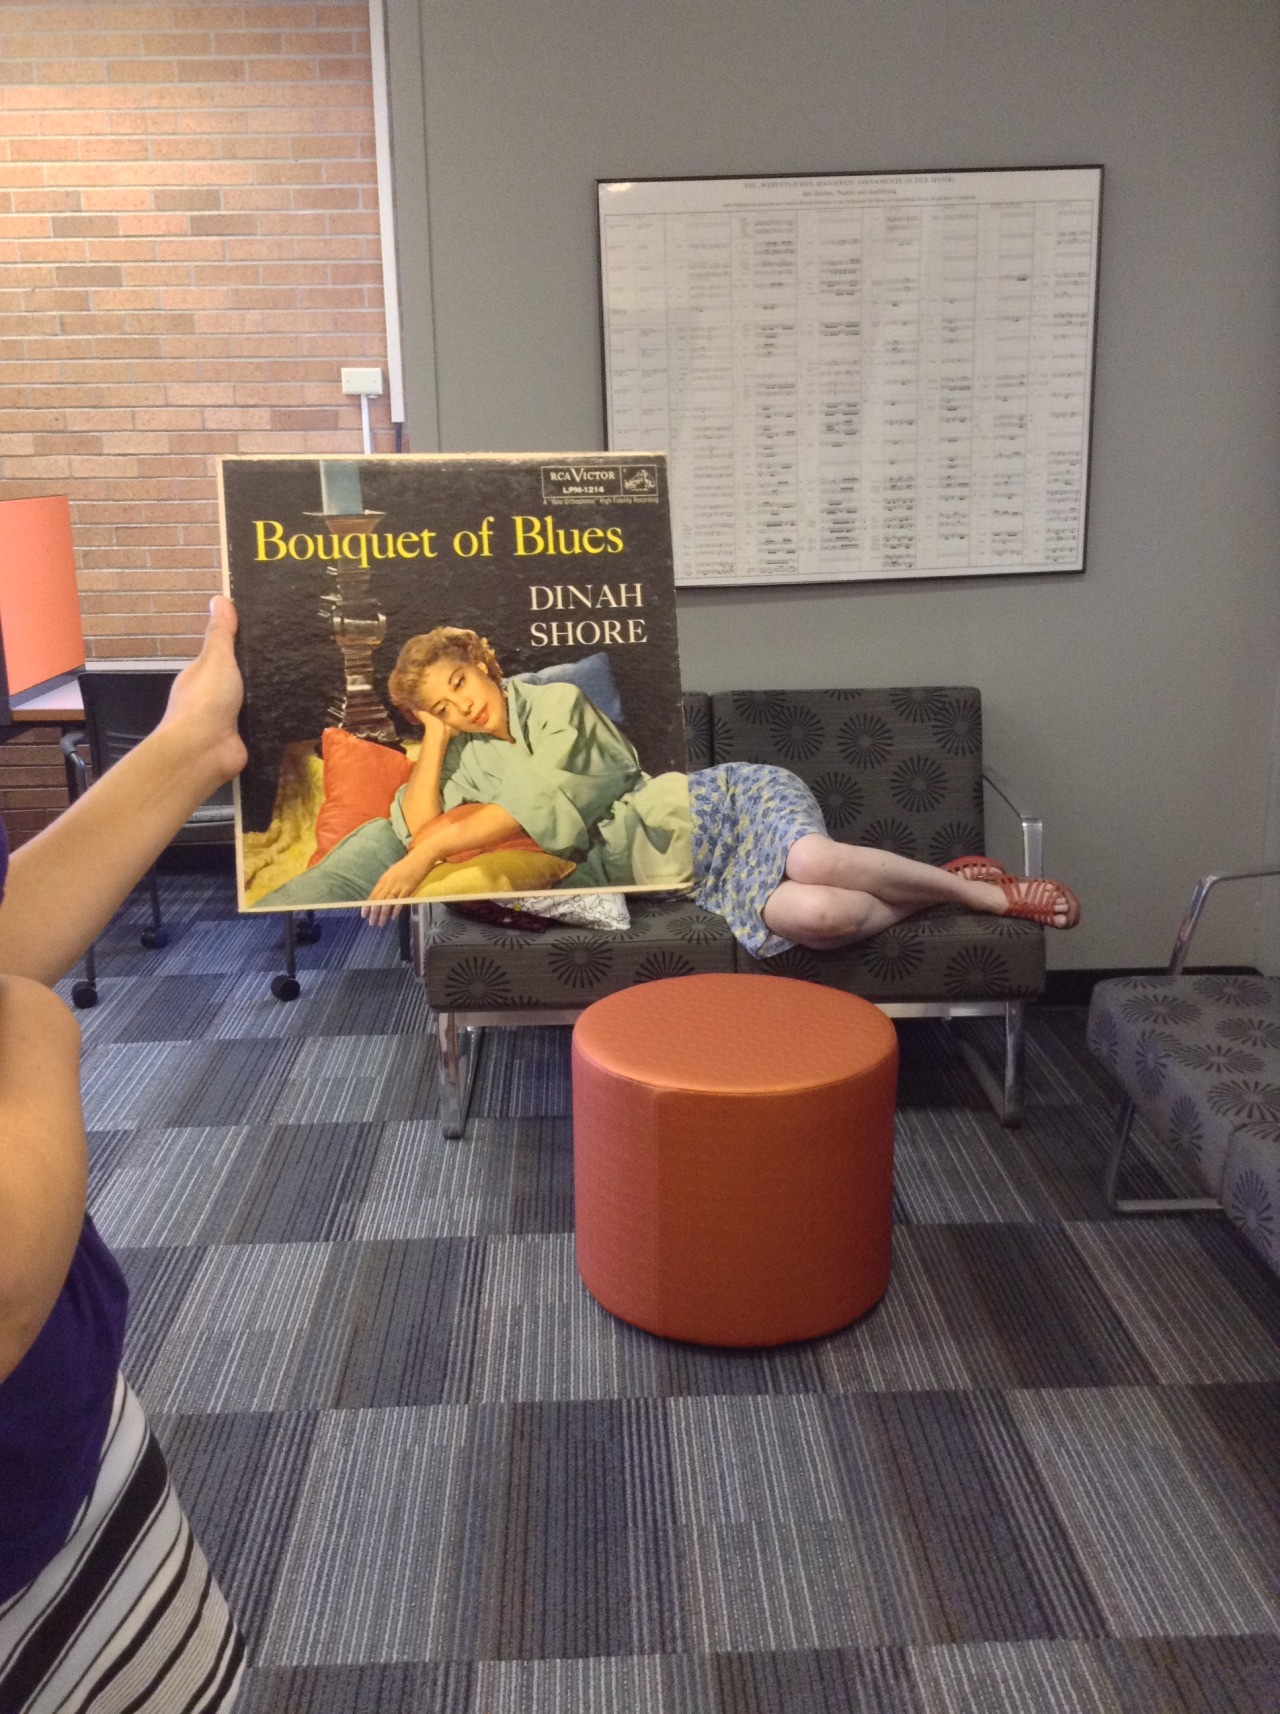 librarysleevefacing:  Dinah Shore might be feeling the blues, but after lounging